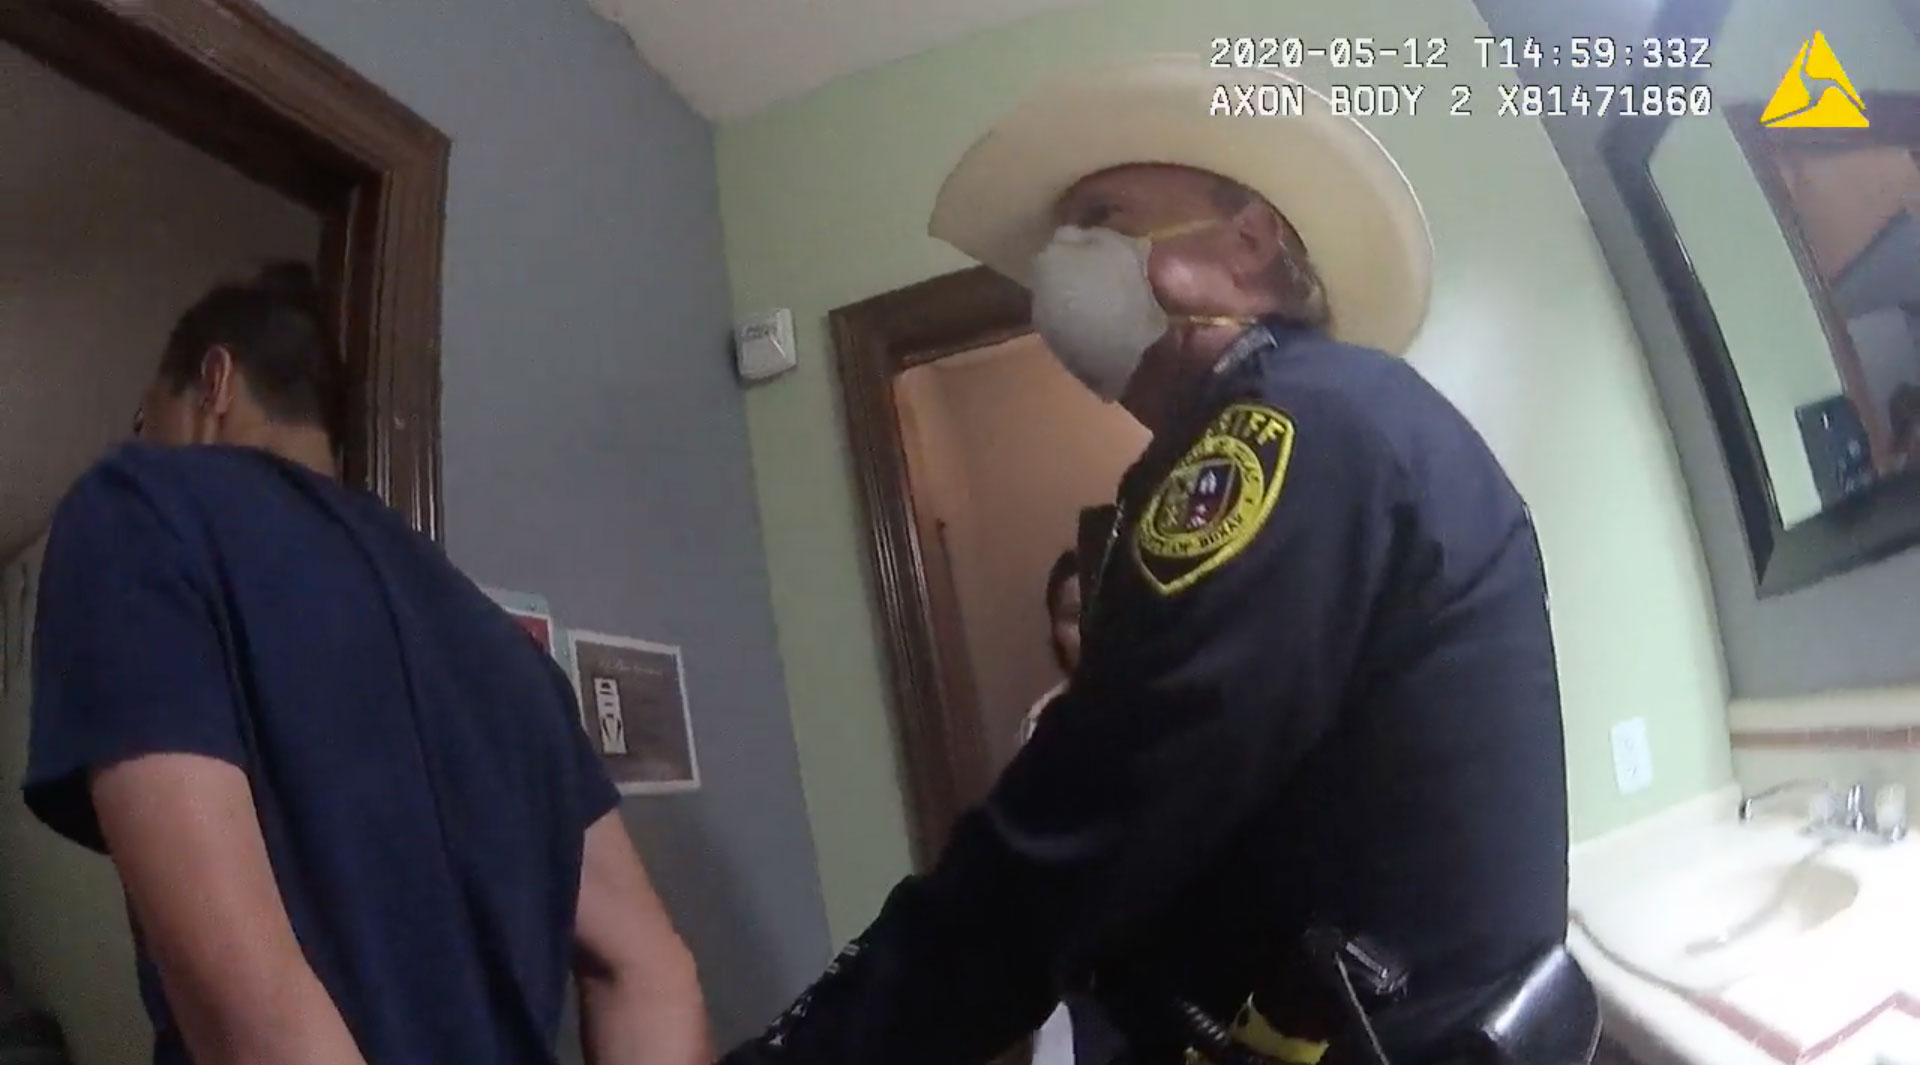 Bexar County Sheriff’s Deputy Harold Schneider leads a teenage boy out of a bathroom. The teen’s face is not visible, and his hands are behind his back.